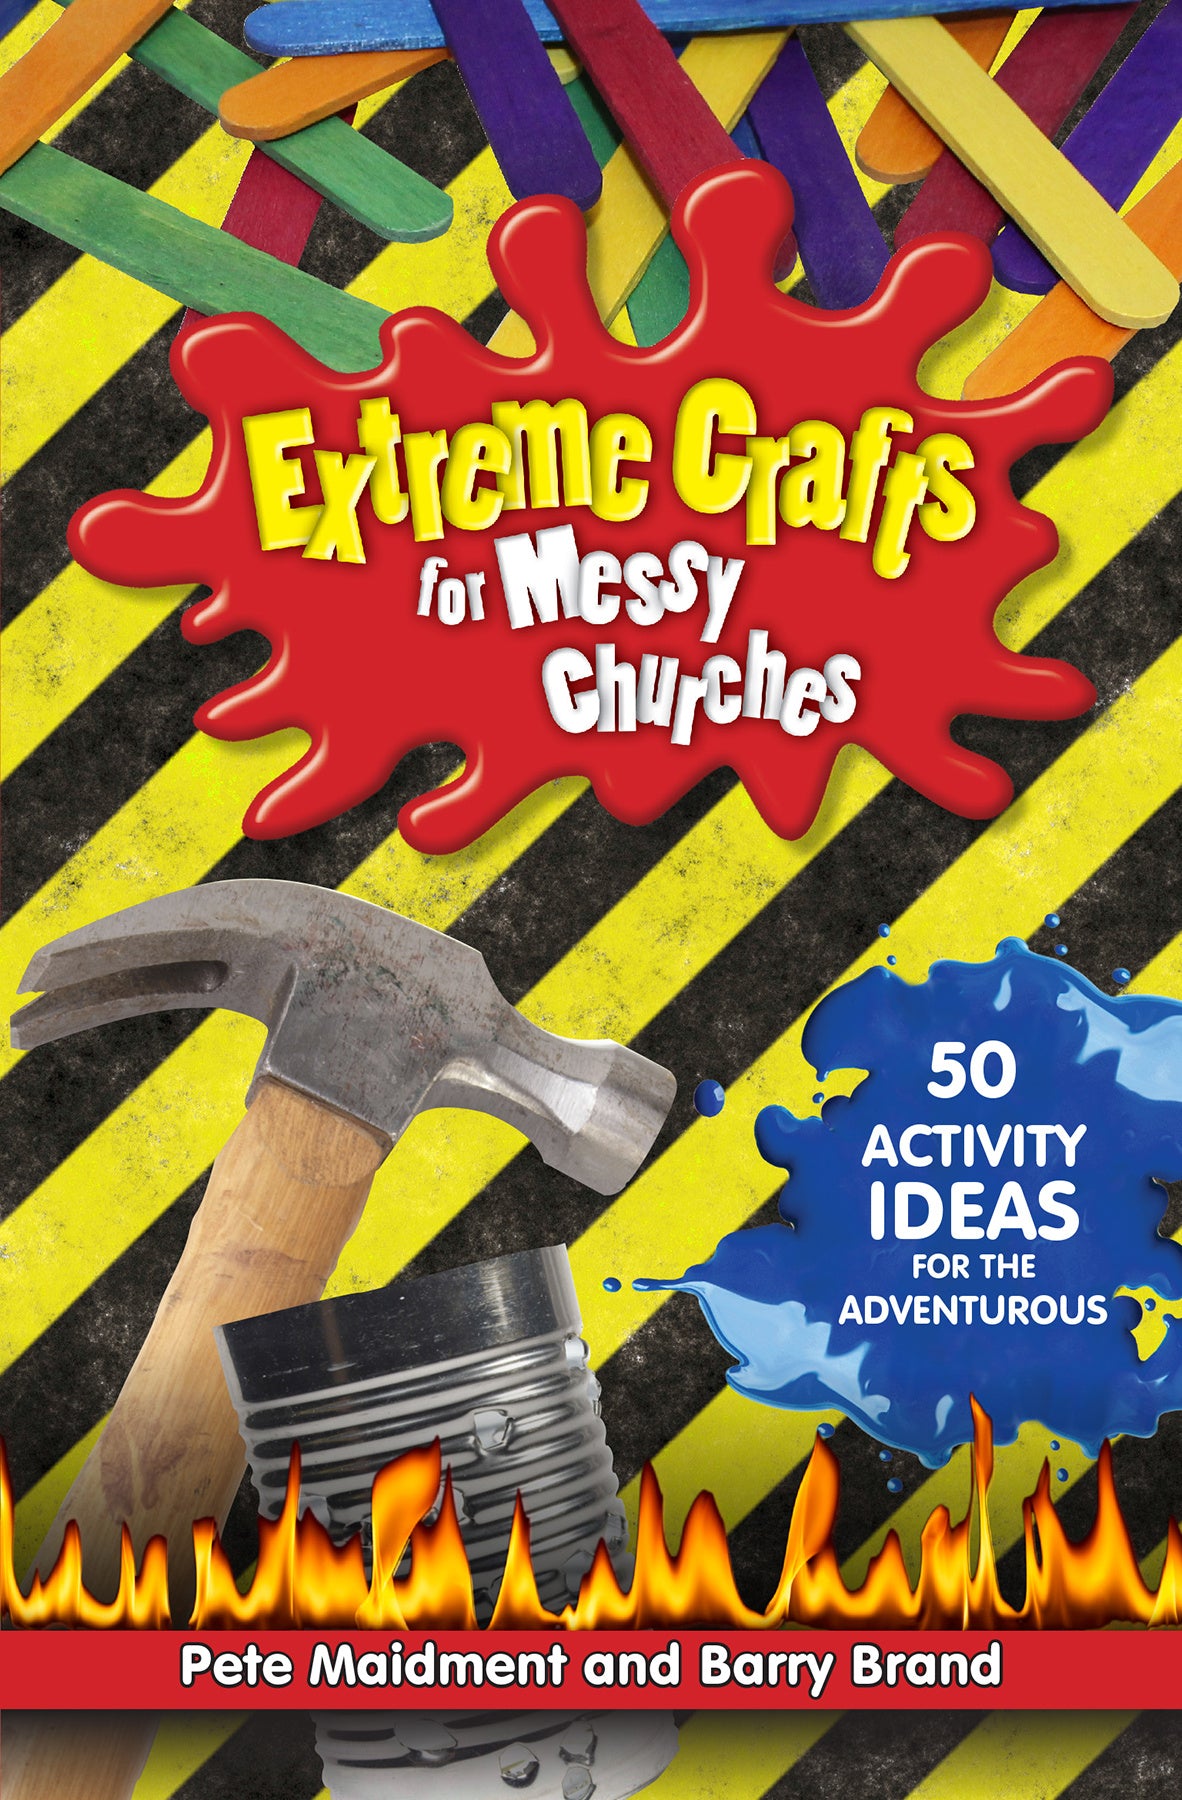 Image of Extreme Crafts for Messy Churches other